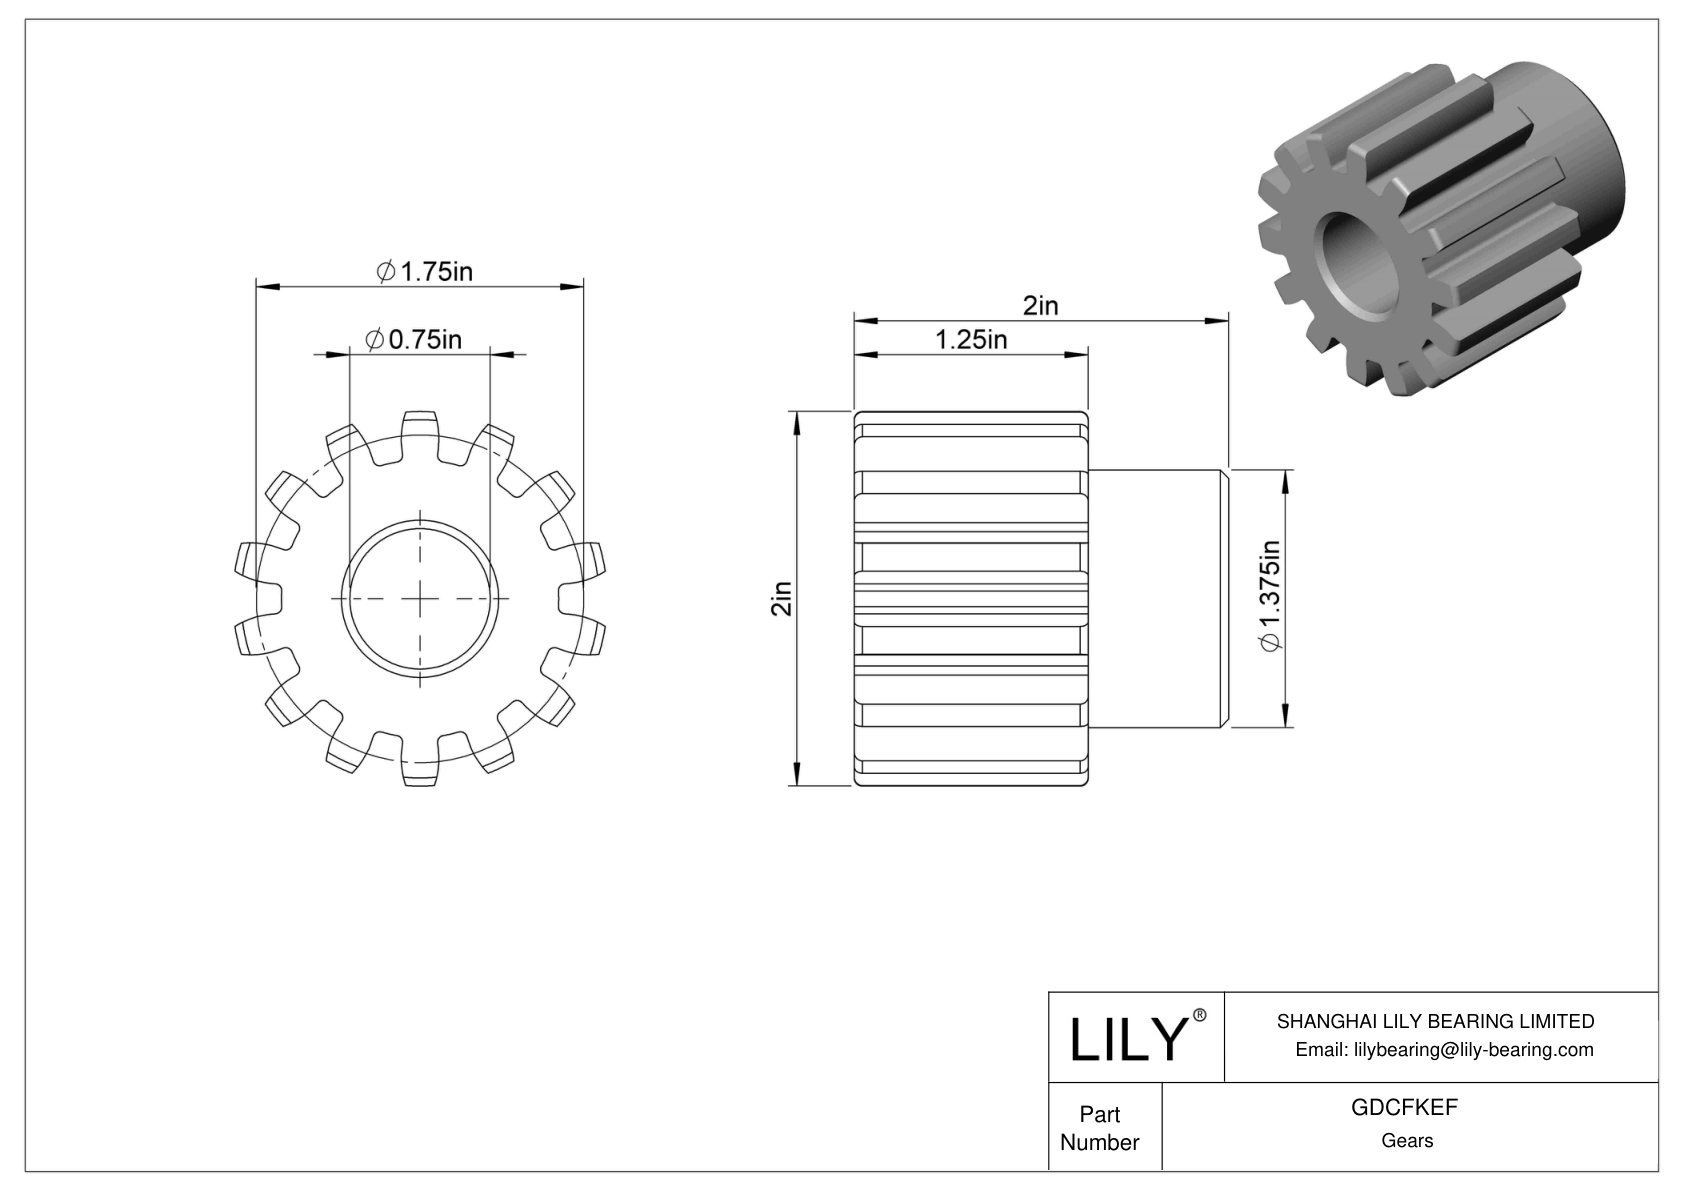 GDCFKEF Metal Gears - 14 1/2° Pressure Angle cad drawing